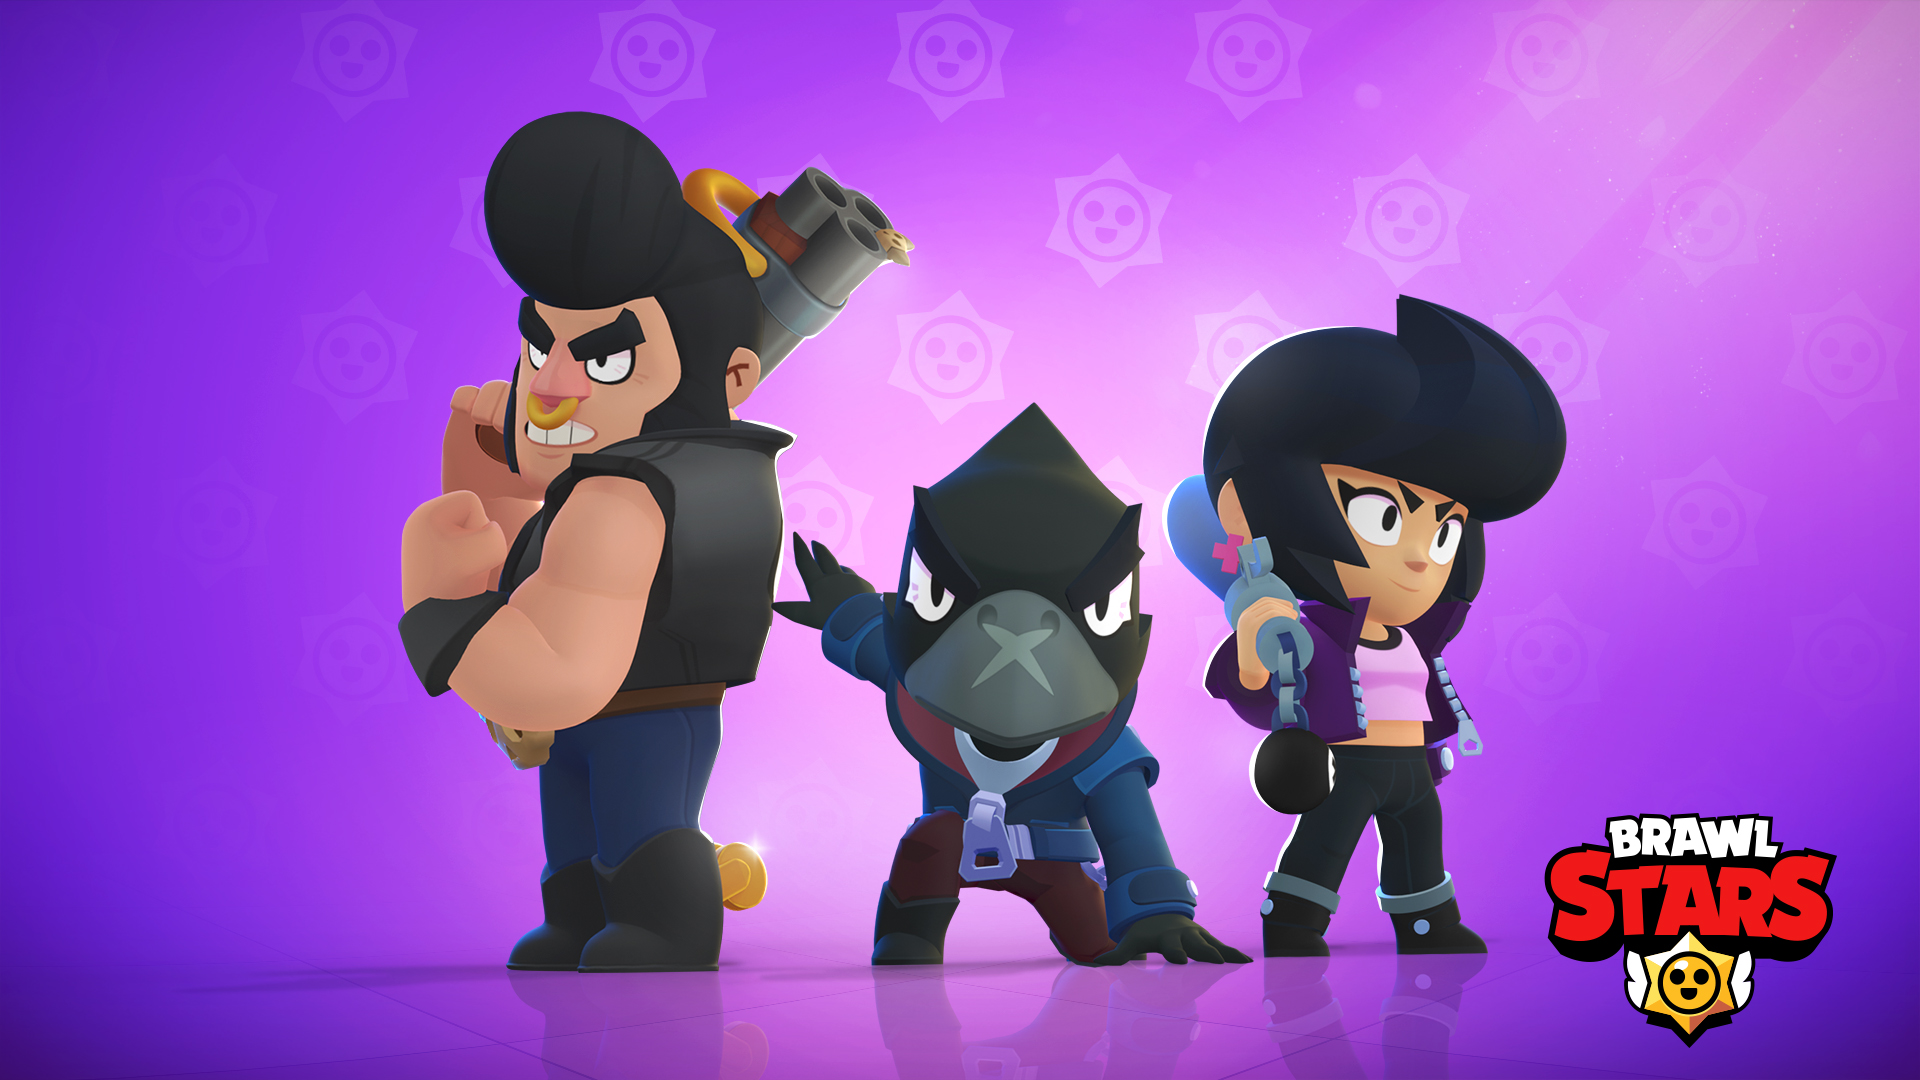 Brawl Stars On Twitter We Know Playing With Randoms Can Be Tough Sometimes So How About Trying Something Different Today Comment Below 1 Your Total Trophies 2 Your - brawl stars frirnd invite